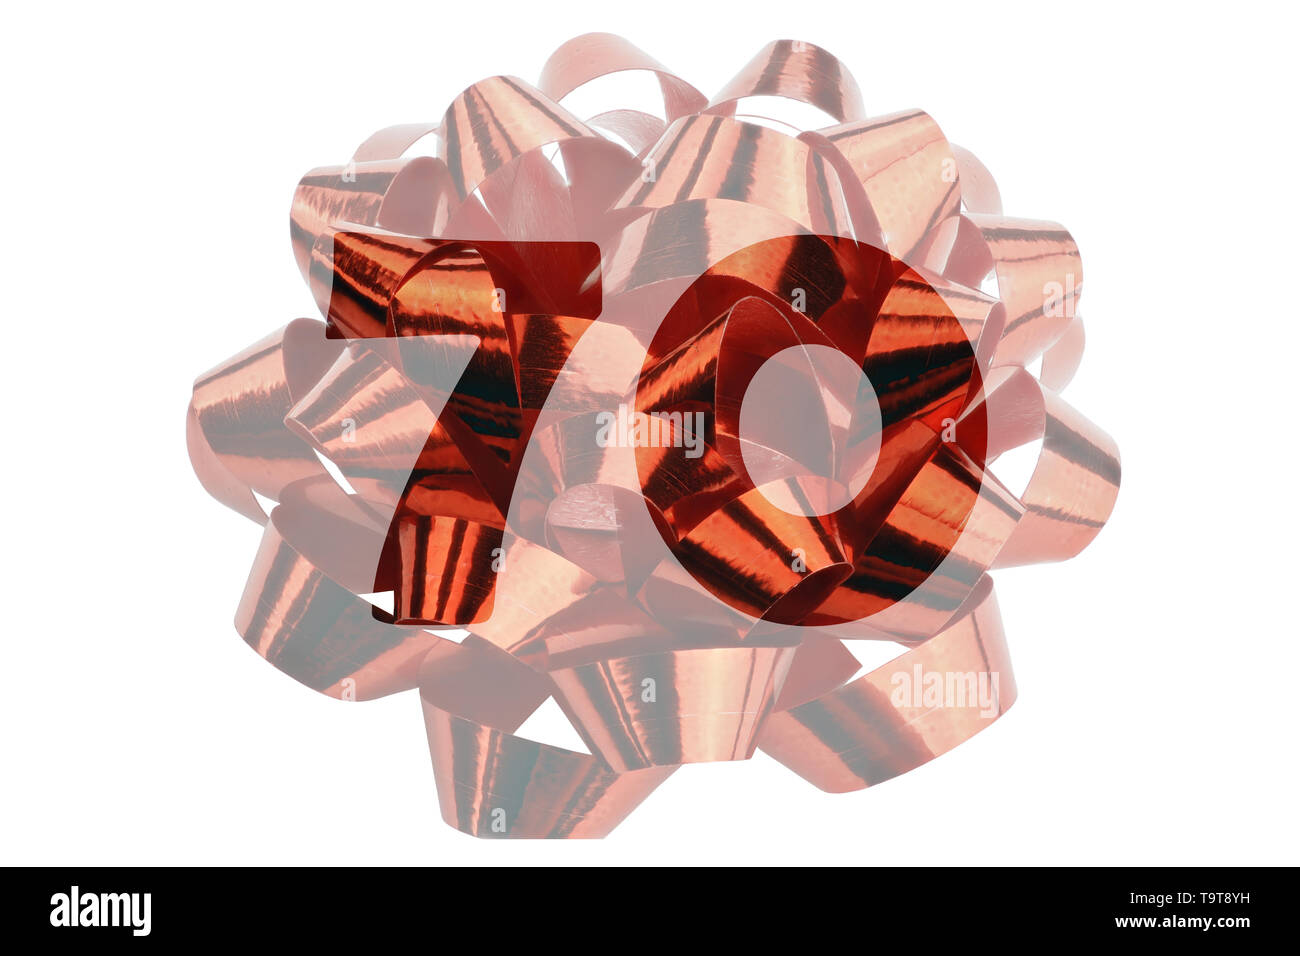 Highlighted number 70 in front of a closeup photograph of a red gift bow Stock Photo